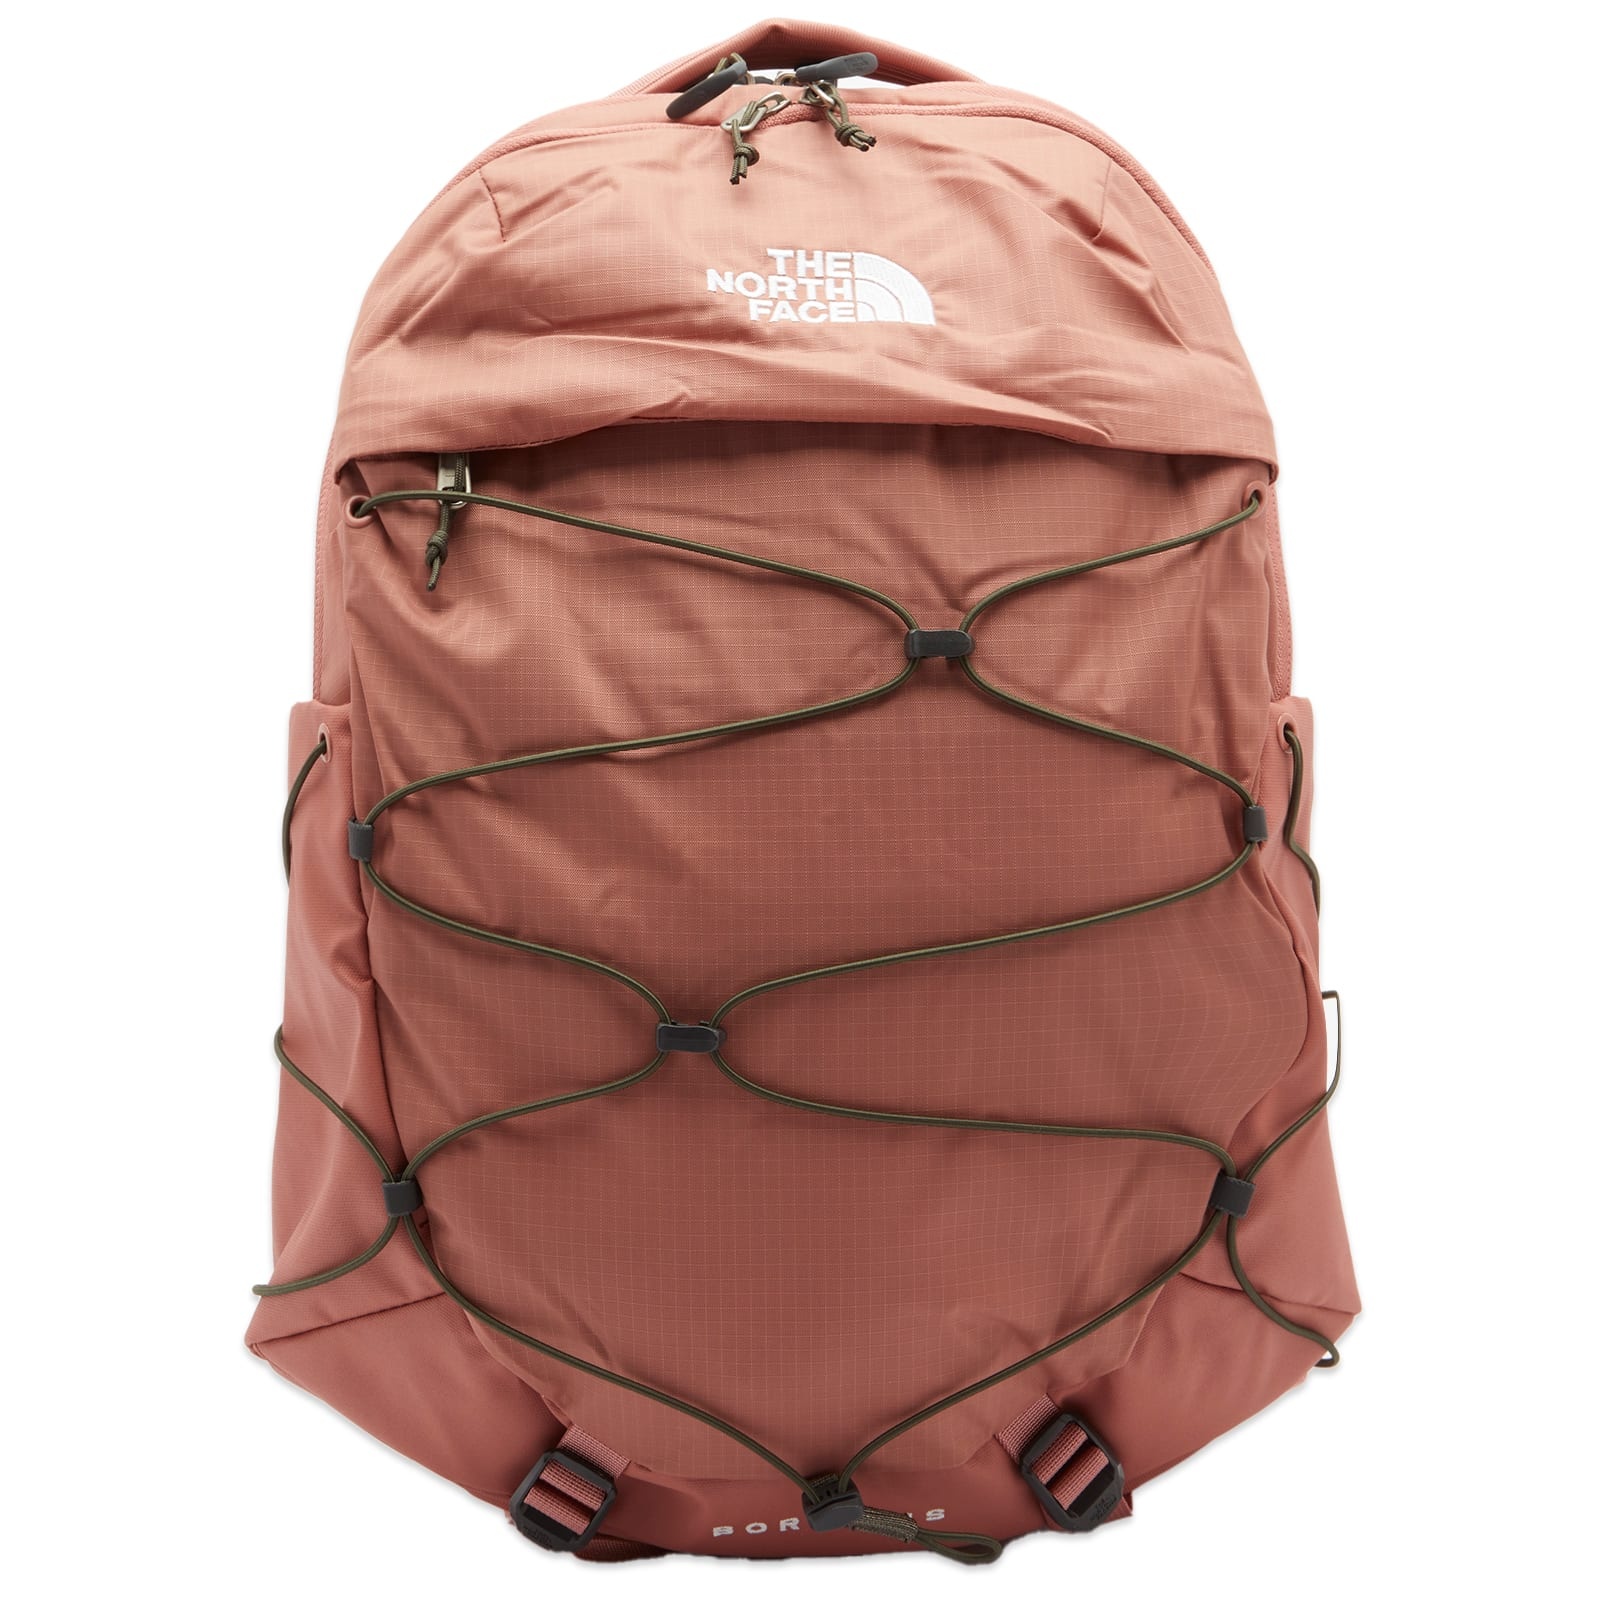 The North Face Borealis Backpack - 1